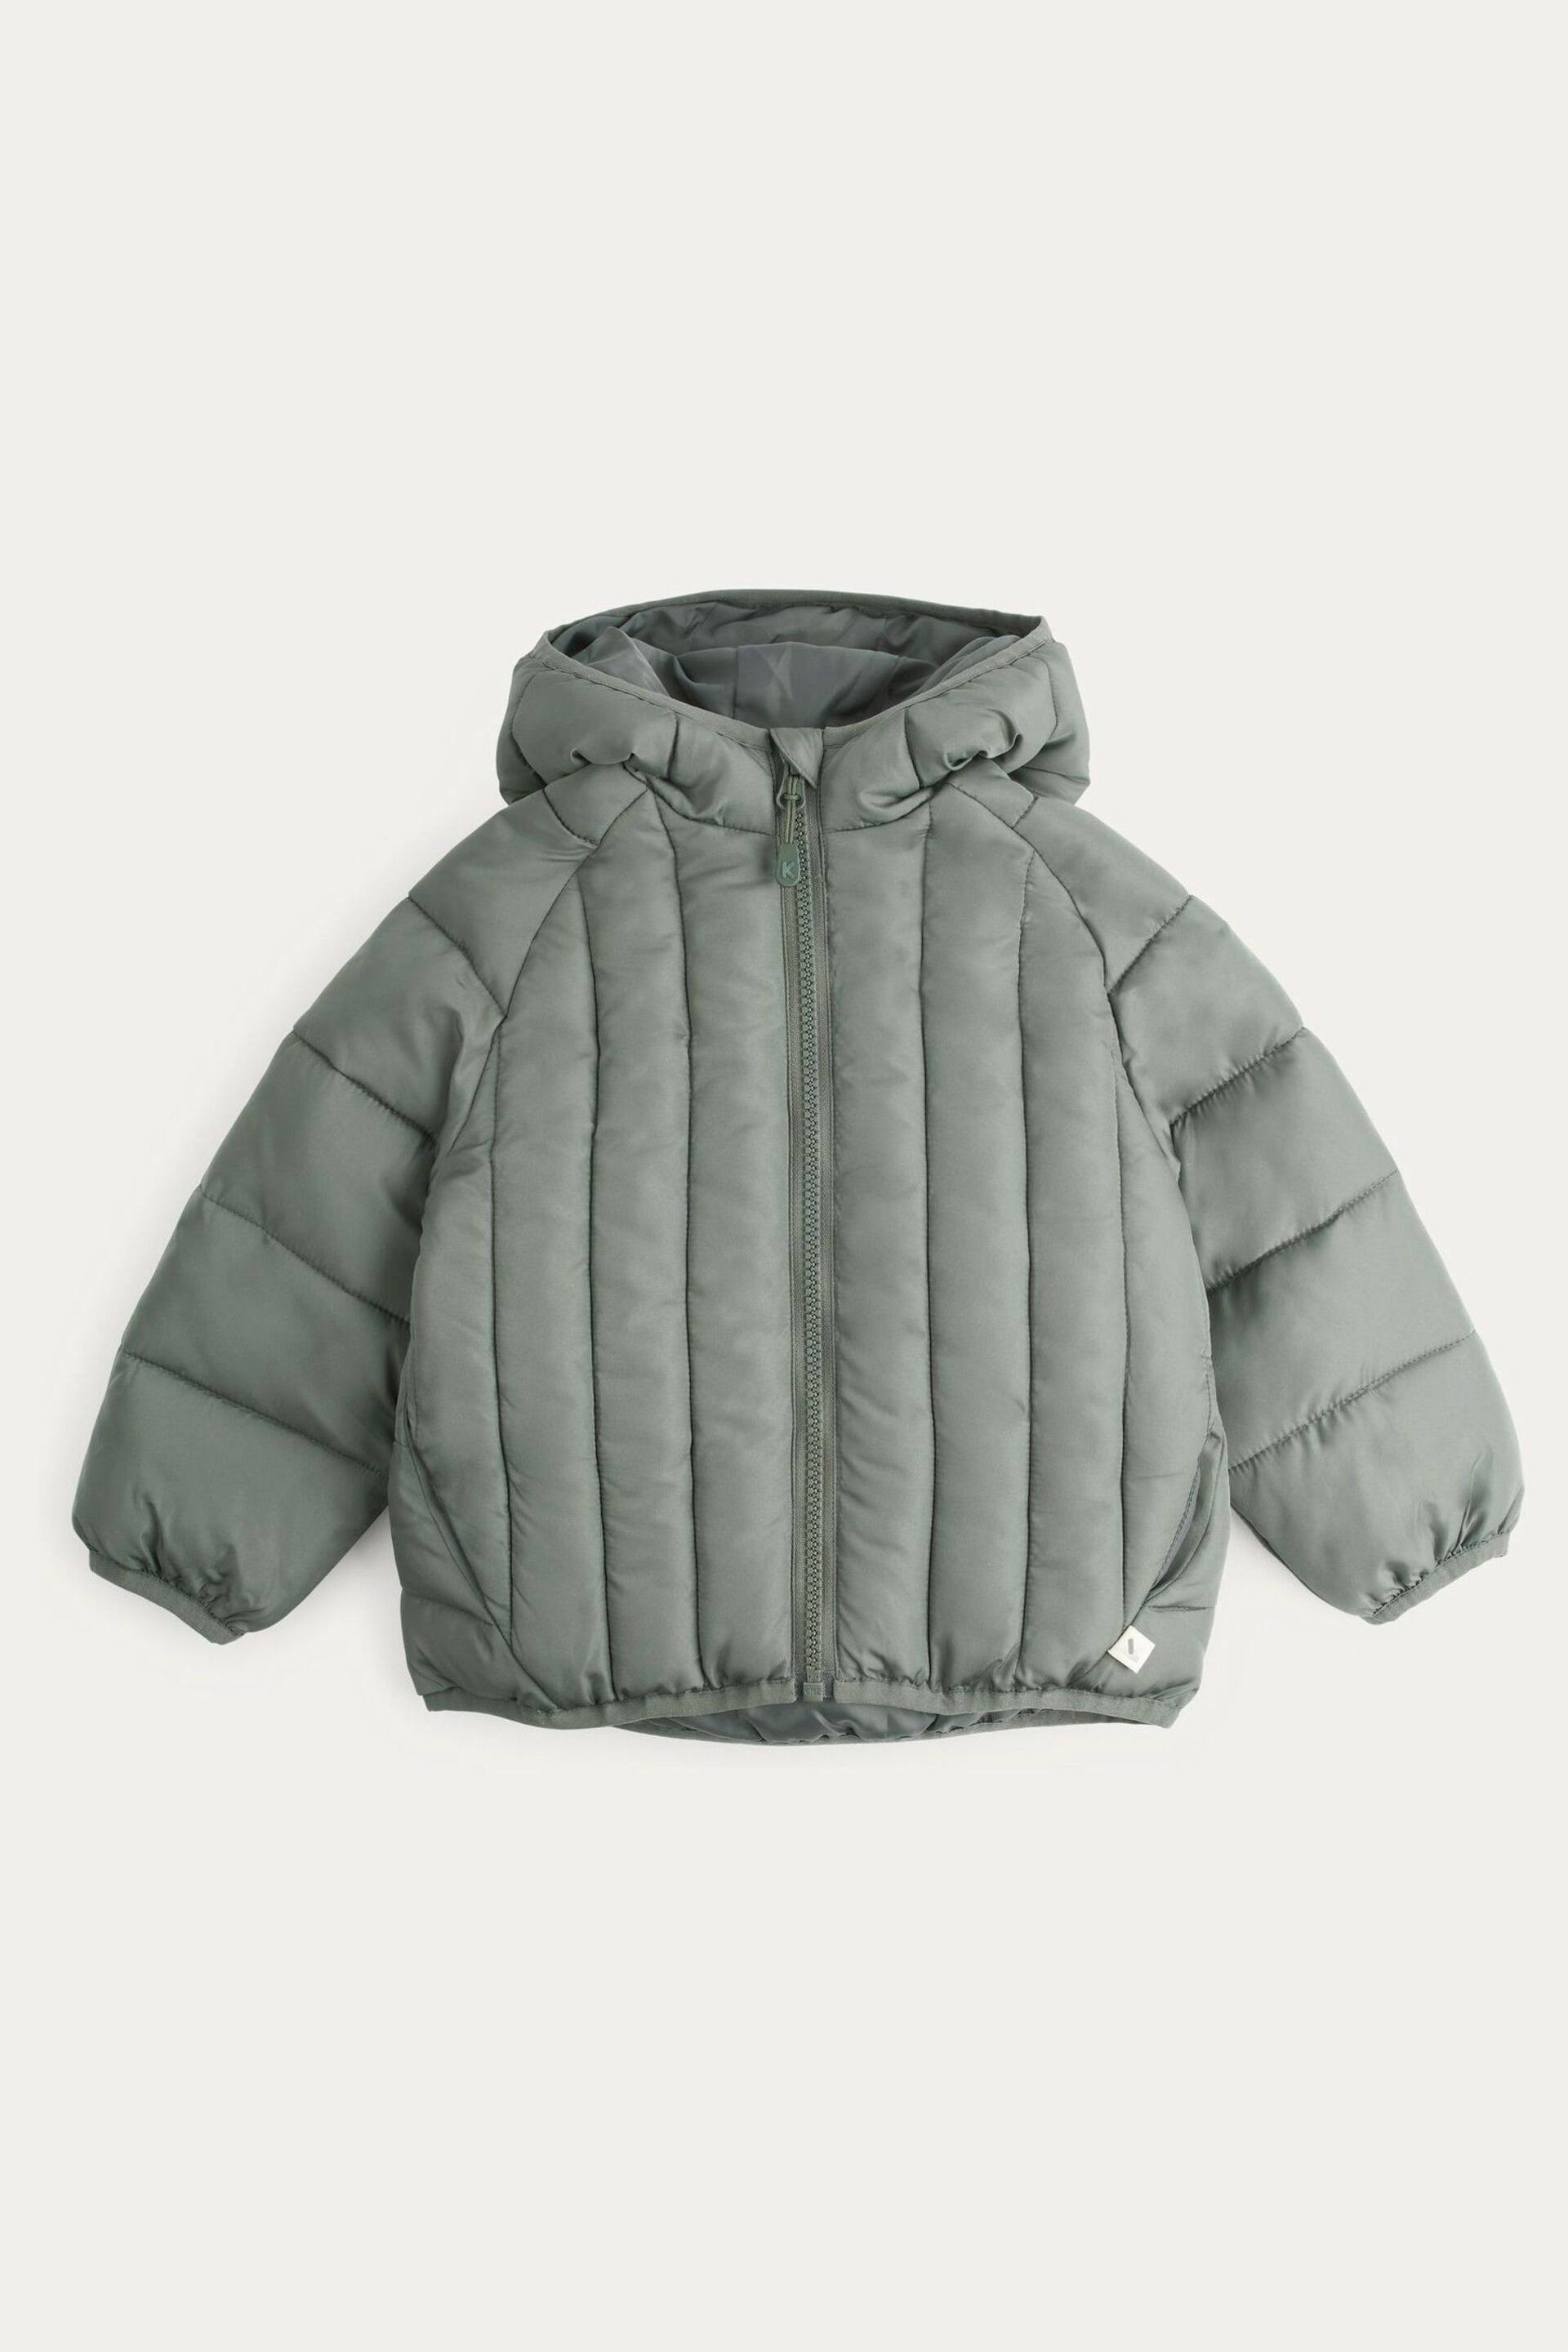 KIDLY Quilted Jacket - Image 1 of 6